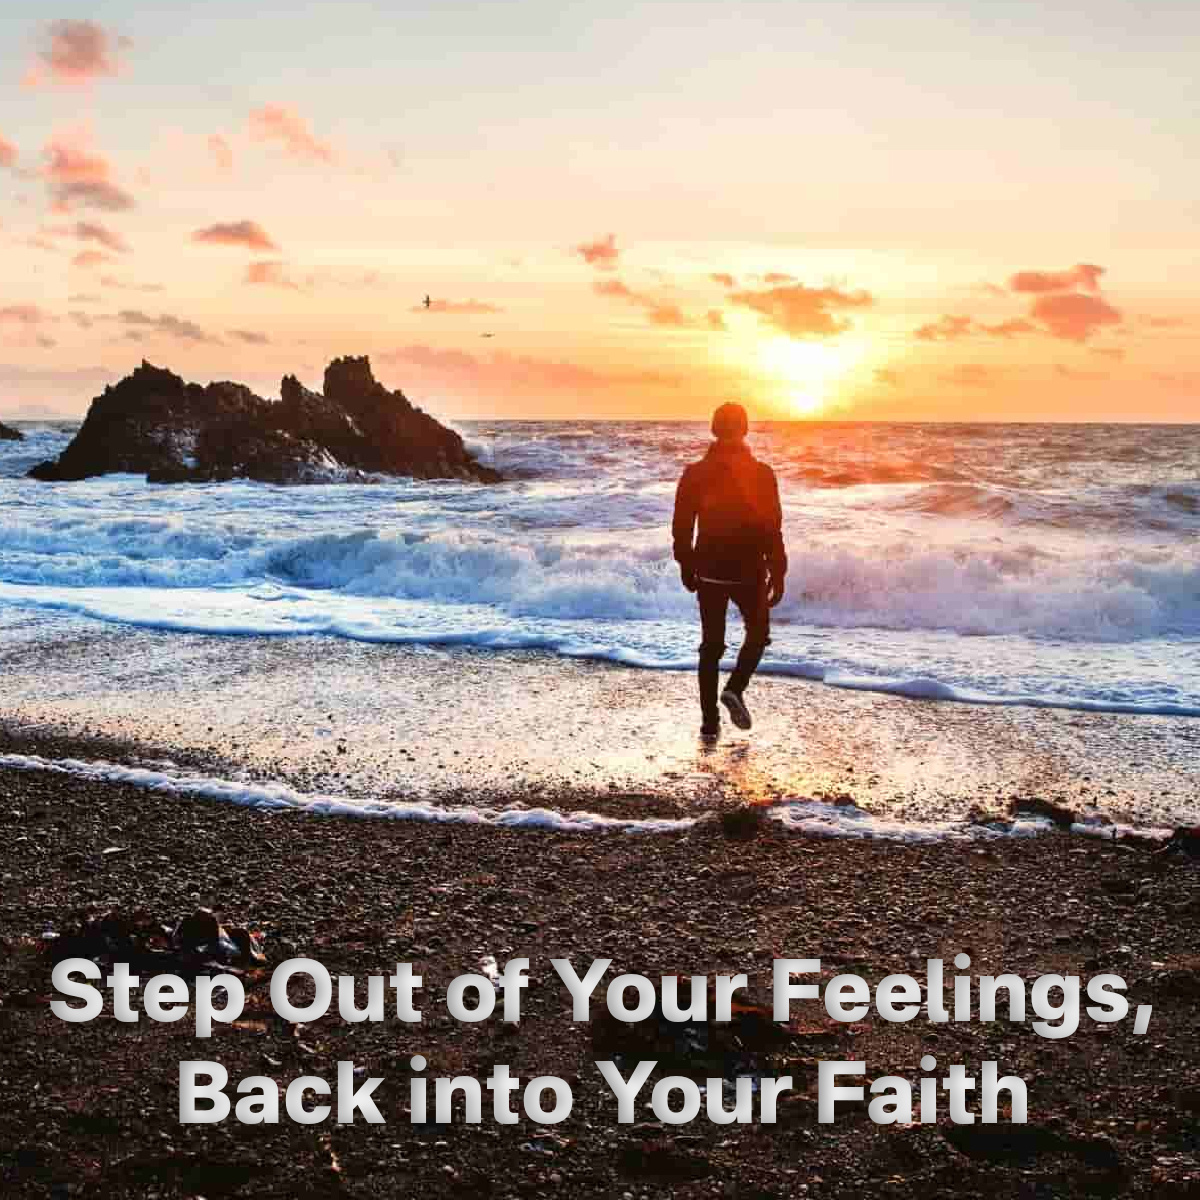 Step Out of Your Feeling, Back into Your Faith - Pastor Ed Gourdin